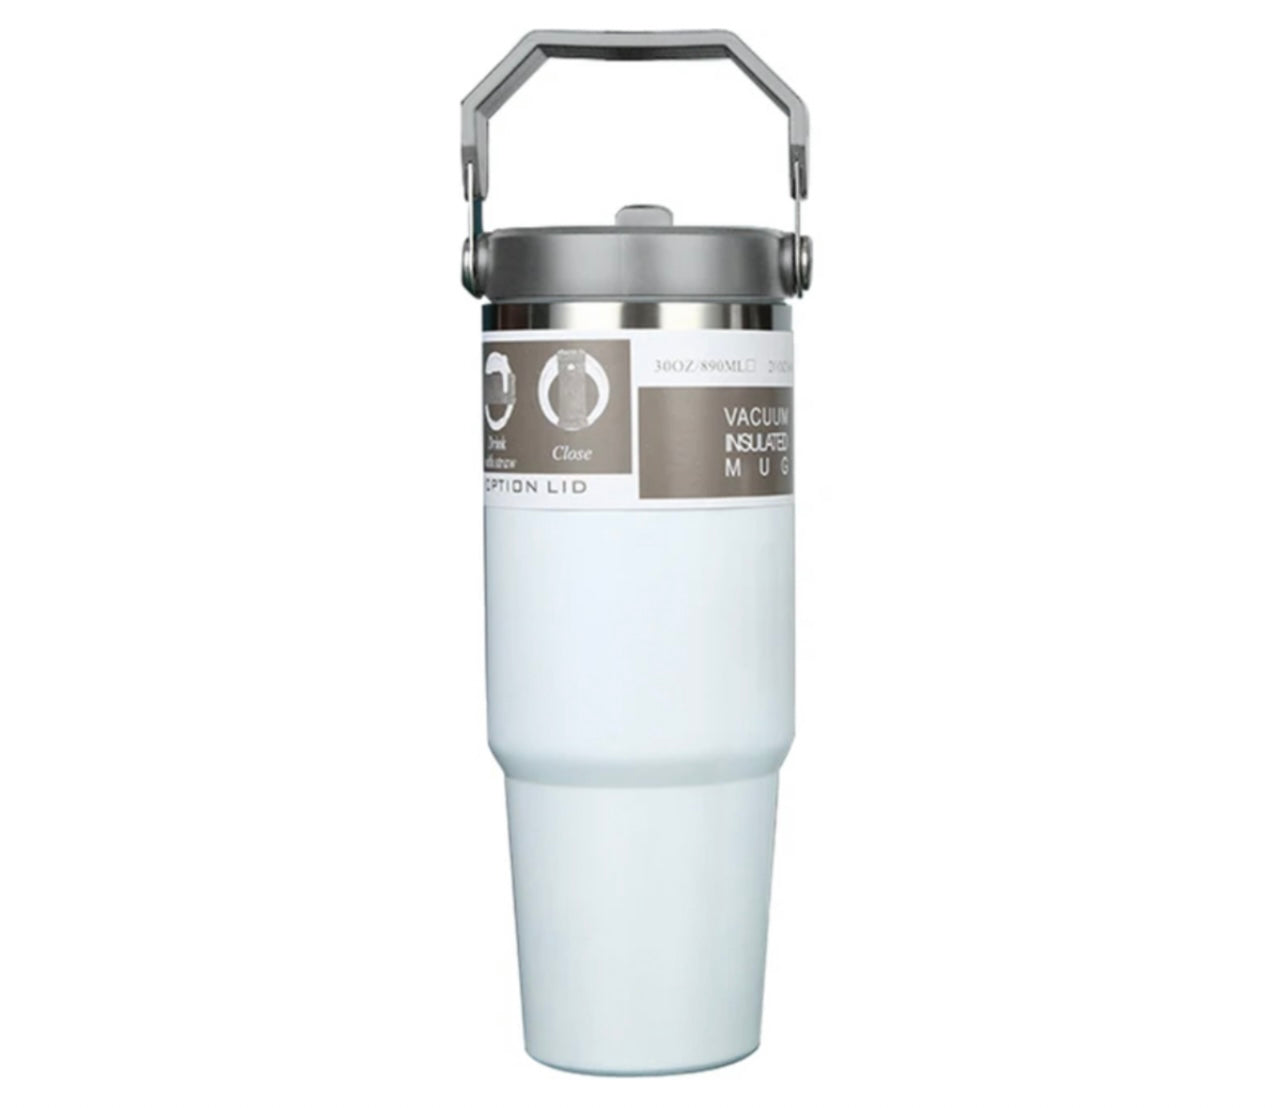 600ml Thermal Insulated Travel Mug with Carry Handle and Straw